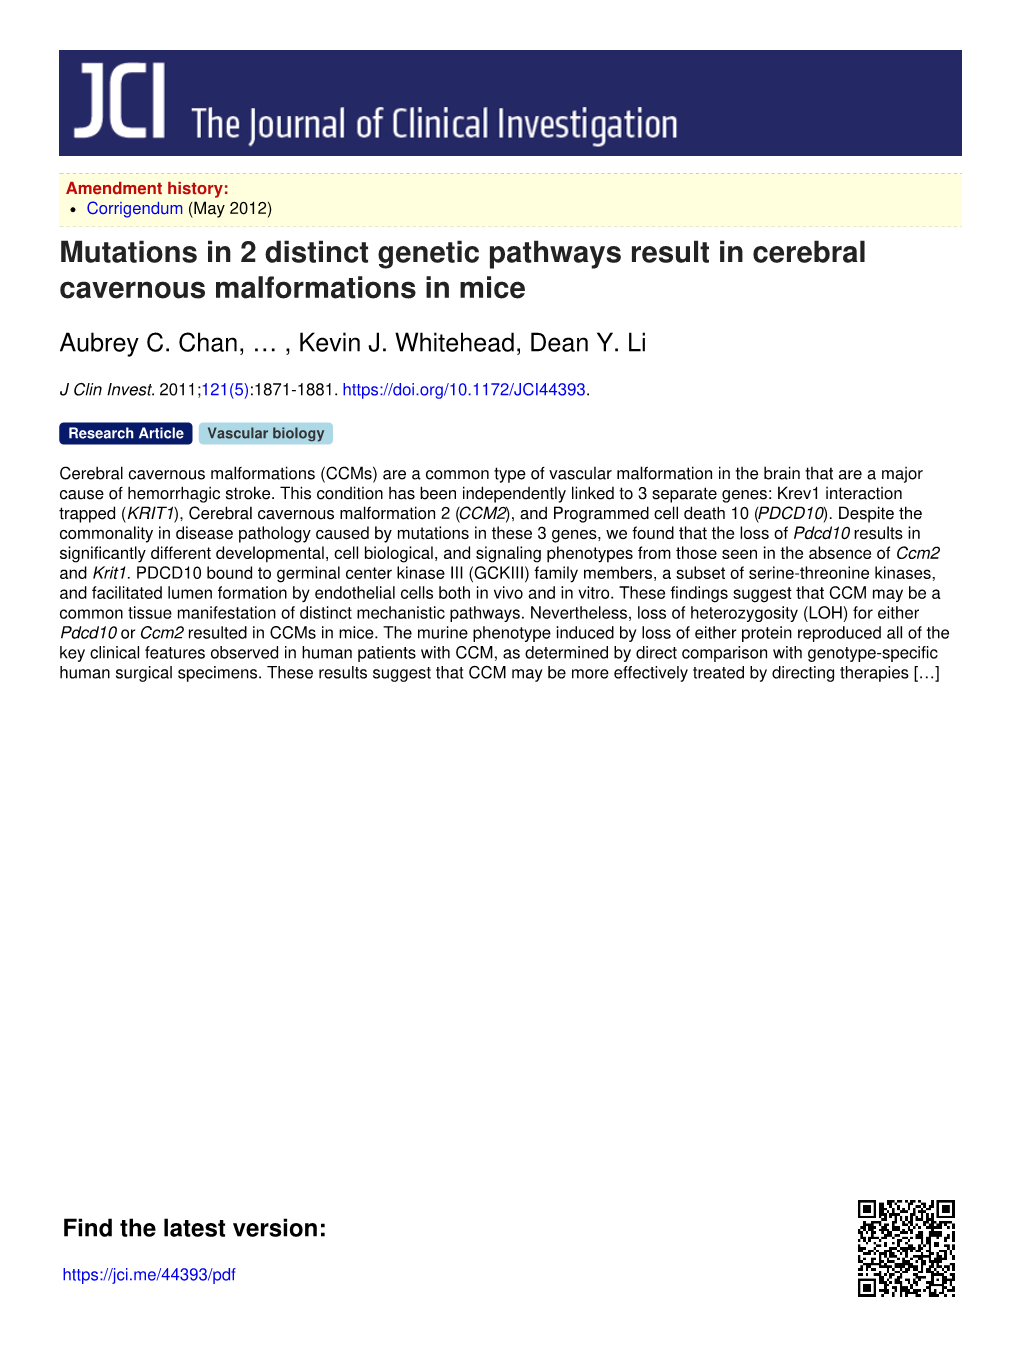 Mutations in 2 Distinct Genetic Pathways Result in Cerebral Cavernous Malformations in Mice